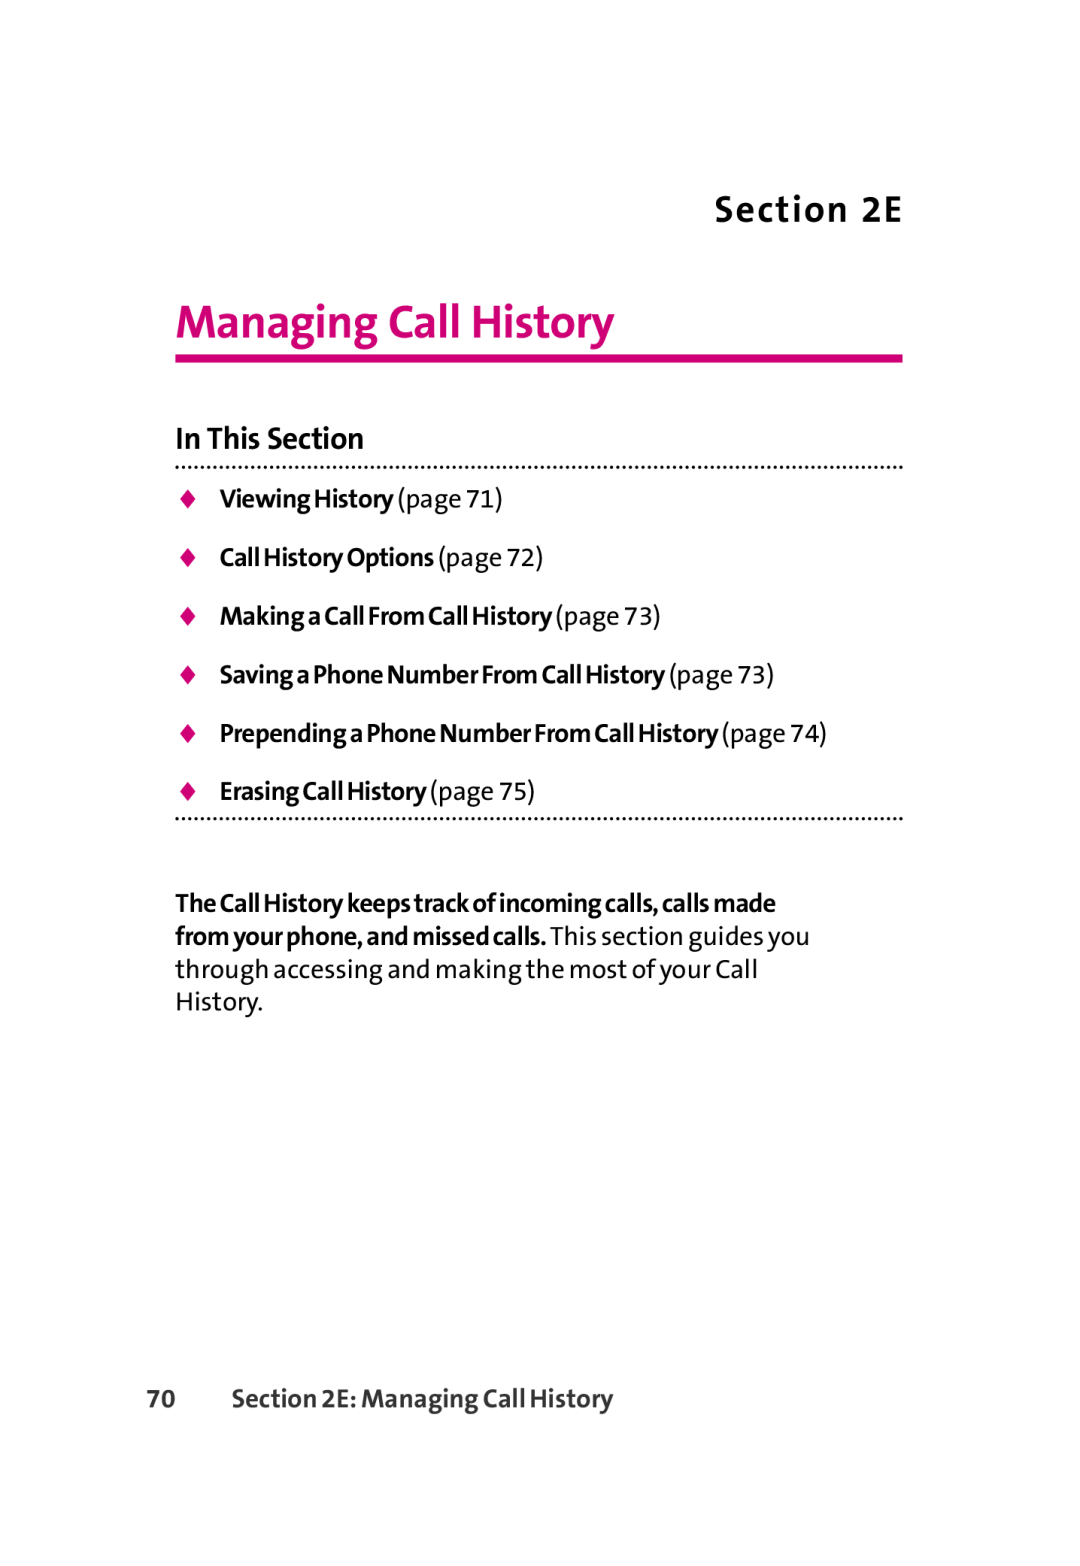 LG Electronics 350 manual ViewingHistorypage CallHistoryOptionspage, E Managing Call History, In This Section 